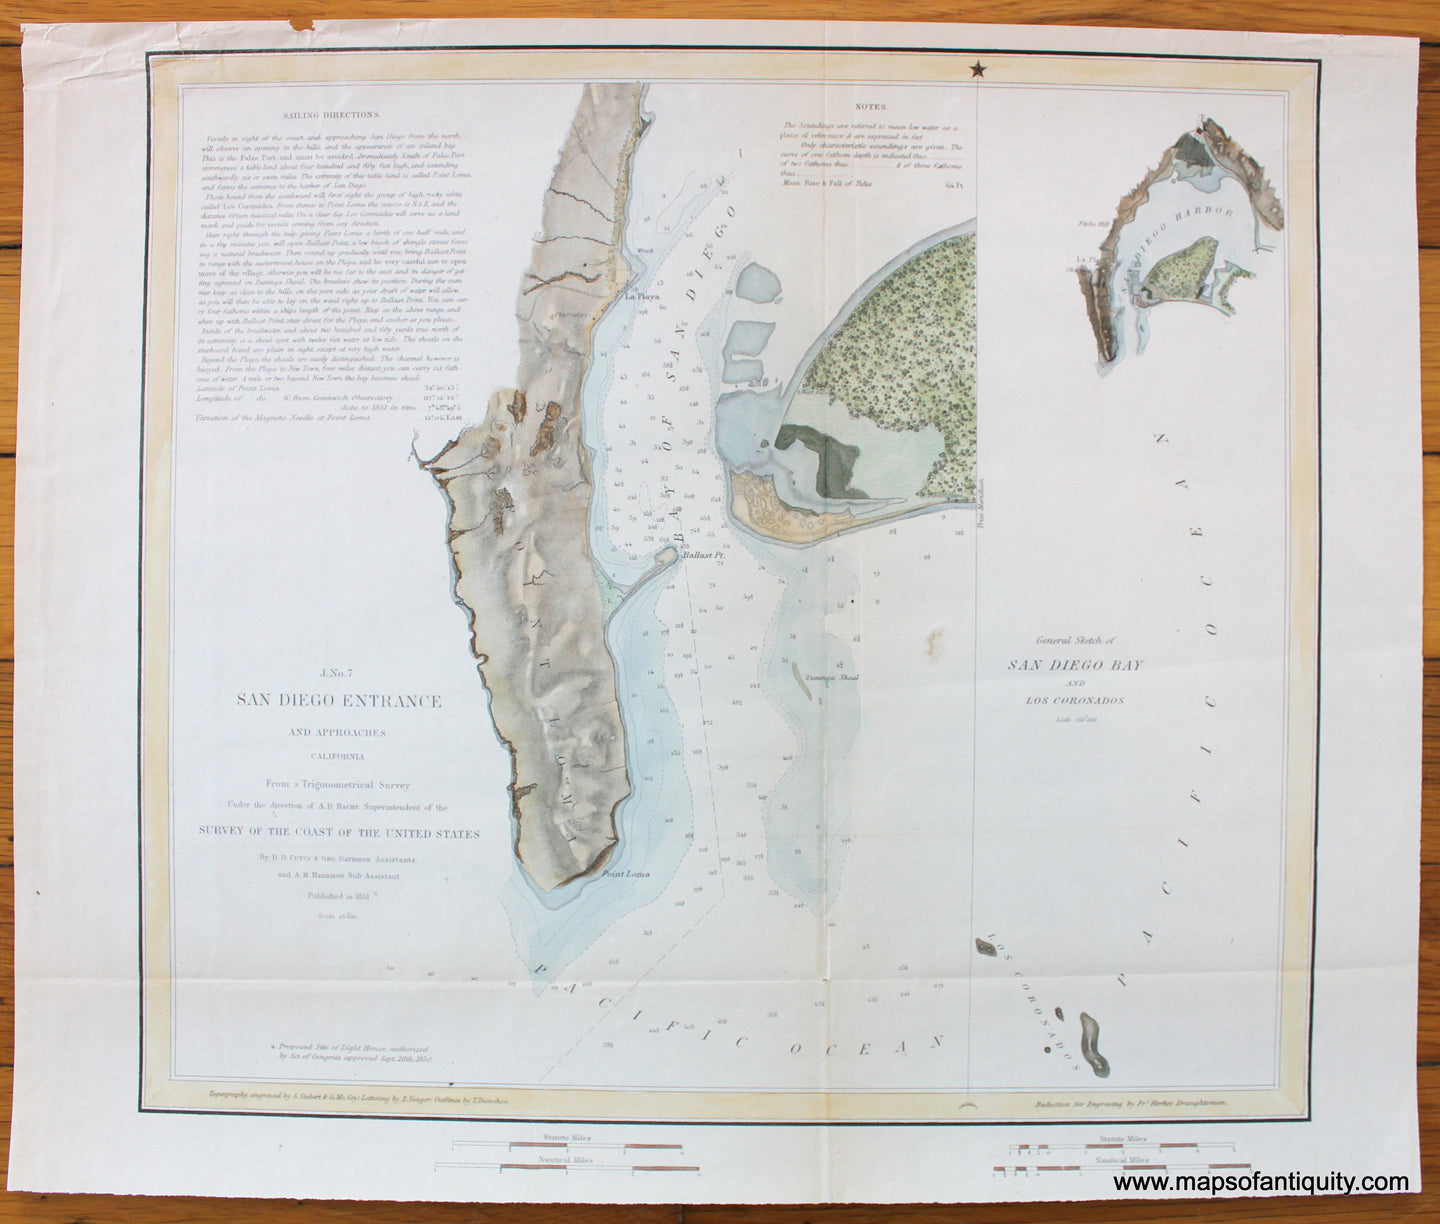 Antique-Map-San-Diego-Entrance-and-Approaches-California-Bay-Harbor-Los-Coronados-United-States-Coast-Survey-Coastal-Chart-1851-1850s-1800s-Mid-19th-Century-Maps-of-Antiquity